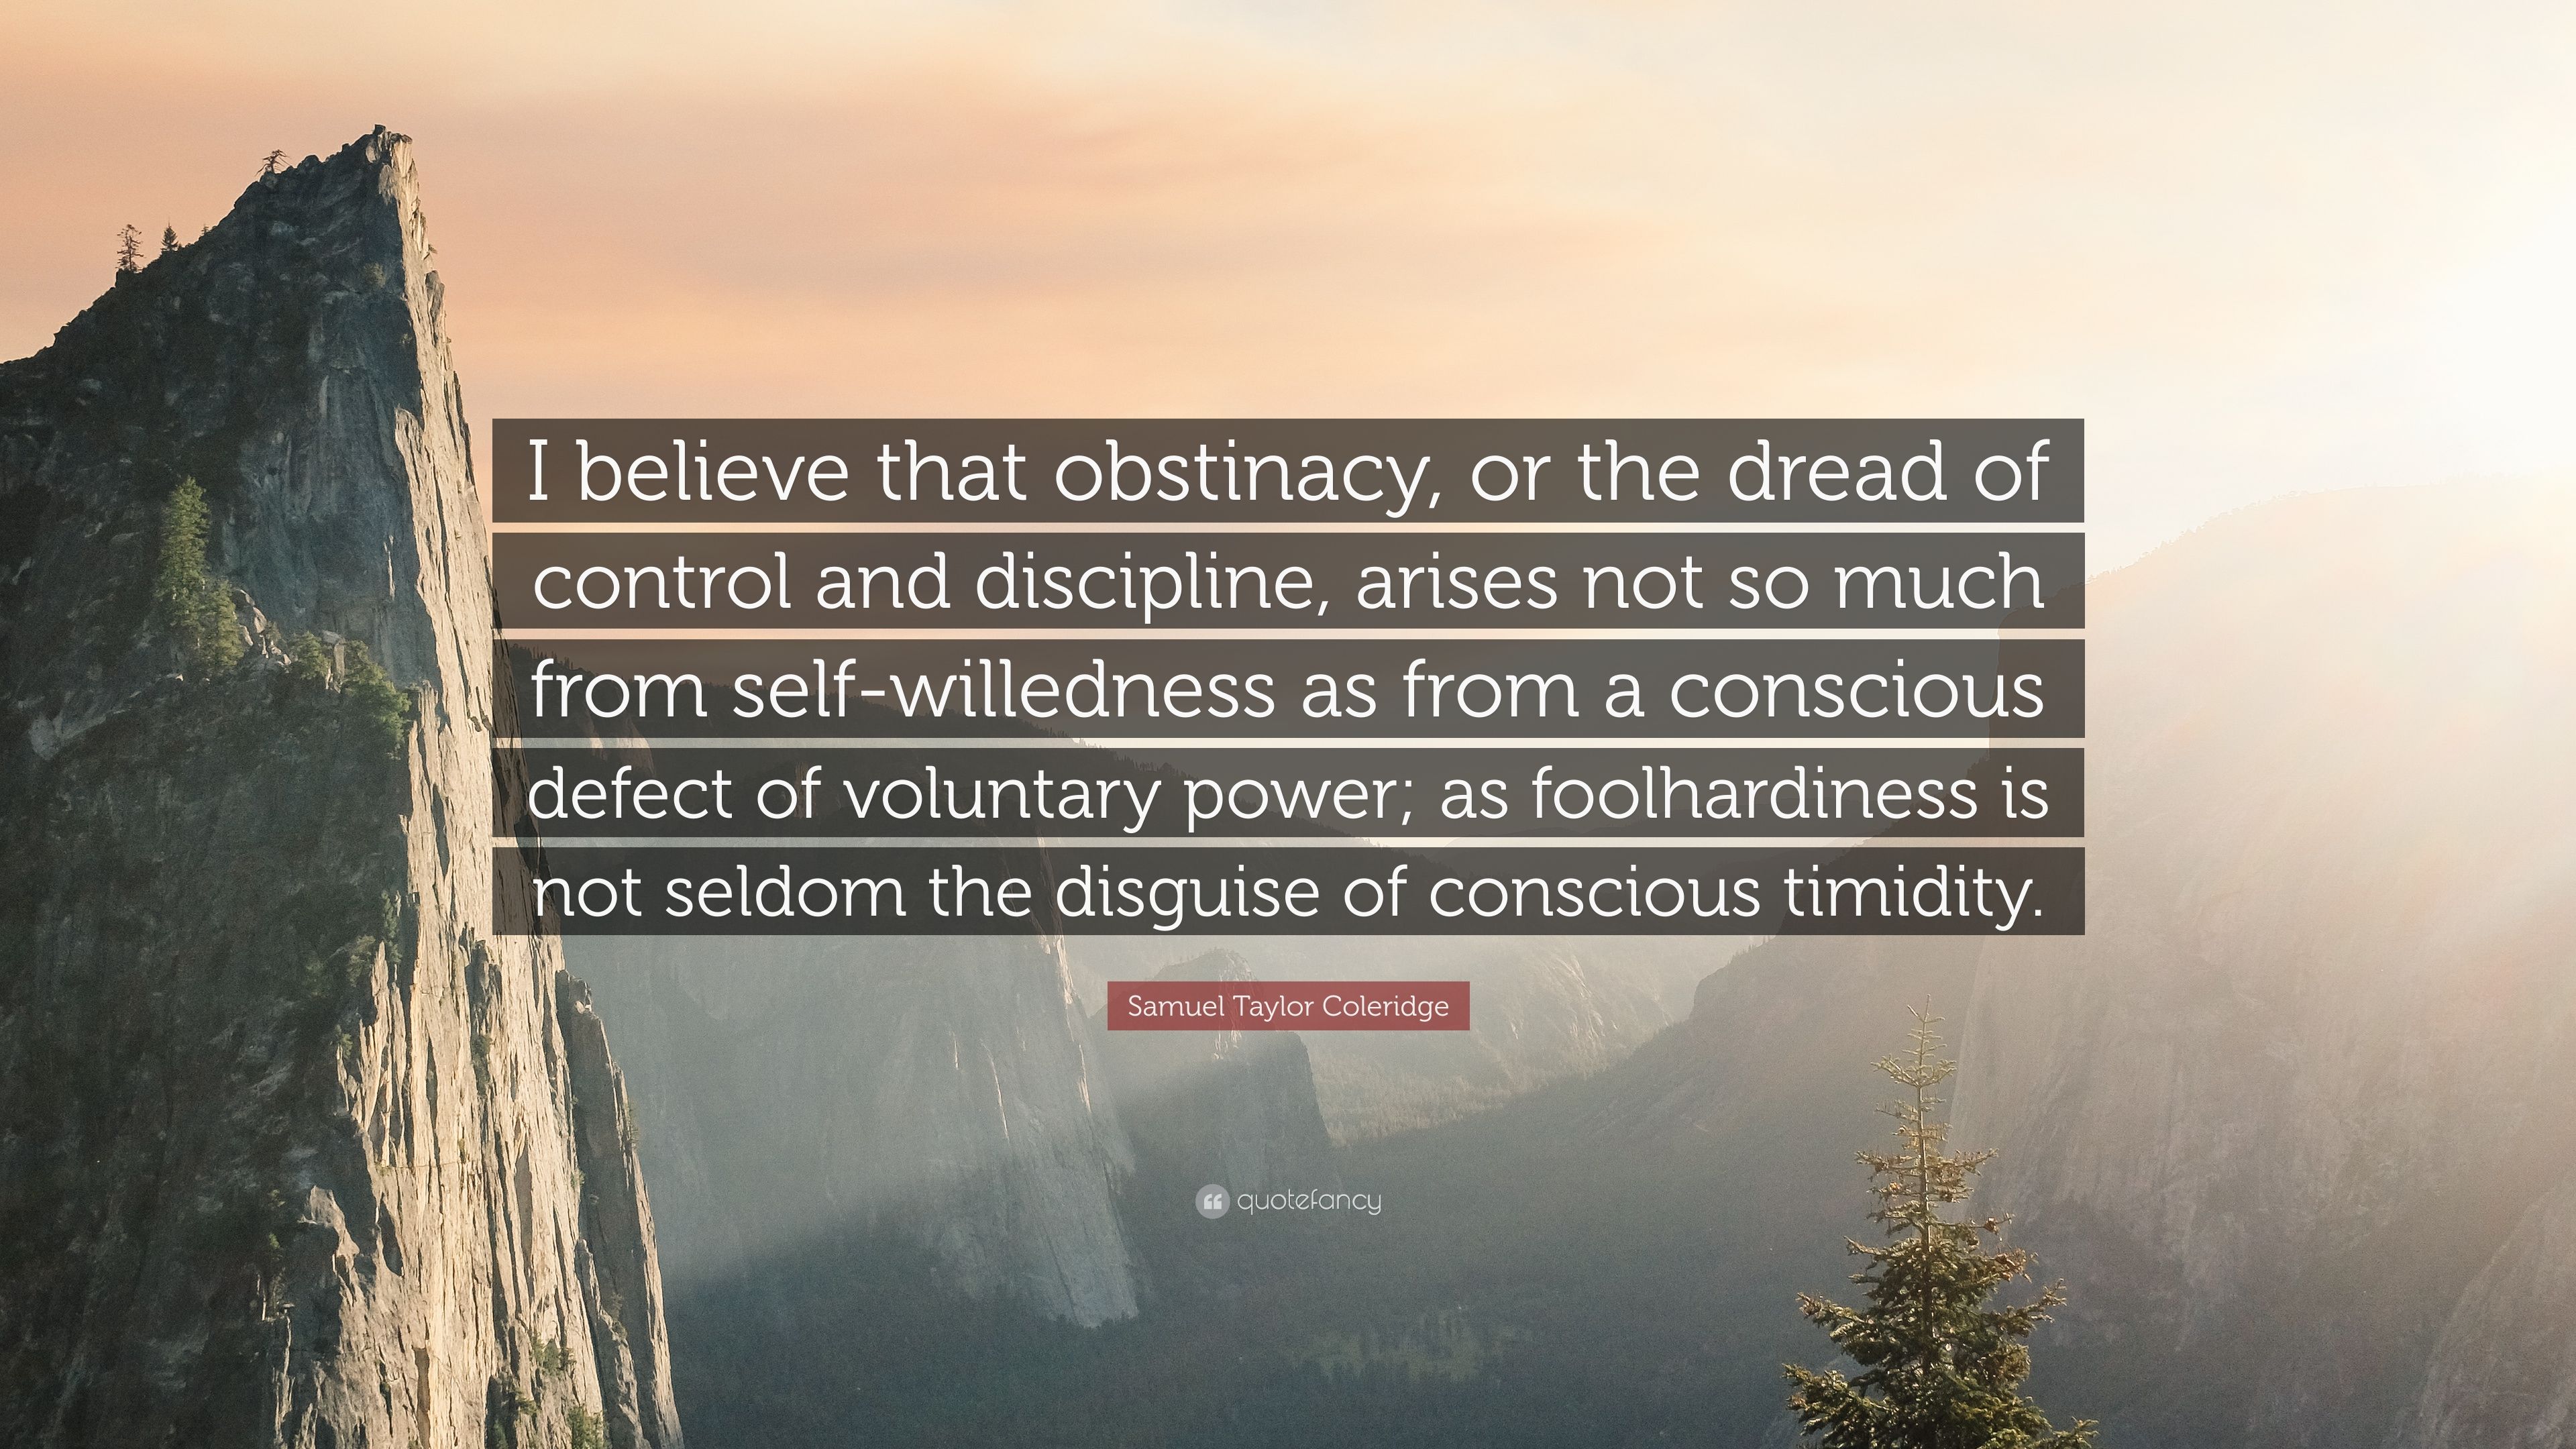 Samuel Taylor Coleridge Quote: “I Believe That Obstinacy, Or The Dread Of Control And Discipline, Arises Not So Much From Self Willedness As From A Cons.” (6 Wallpaper)